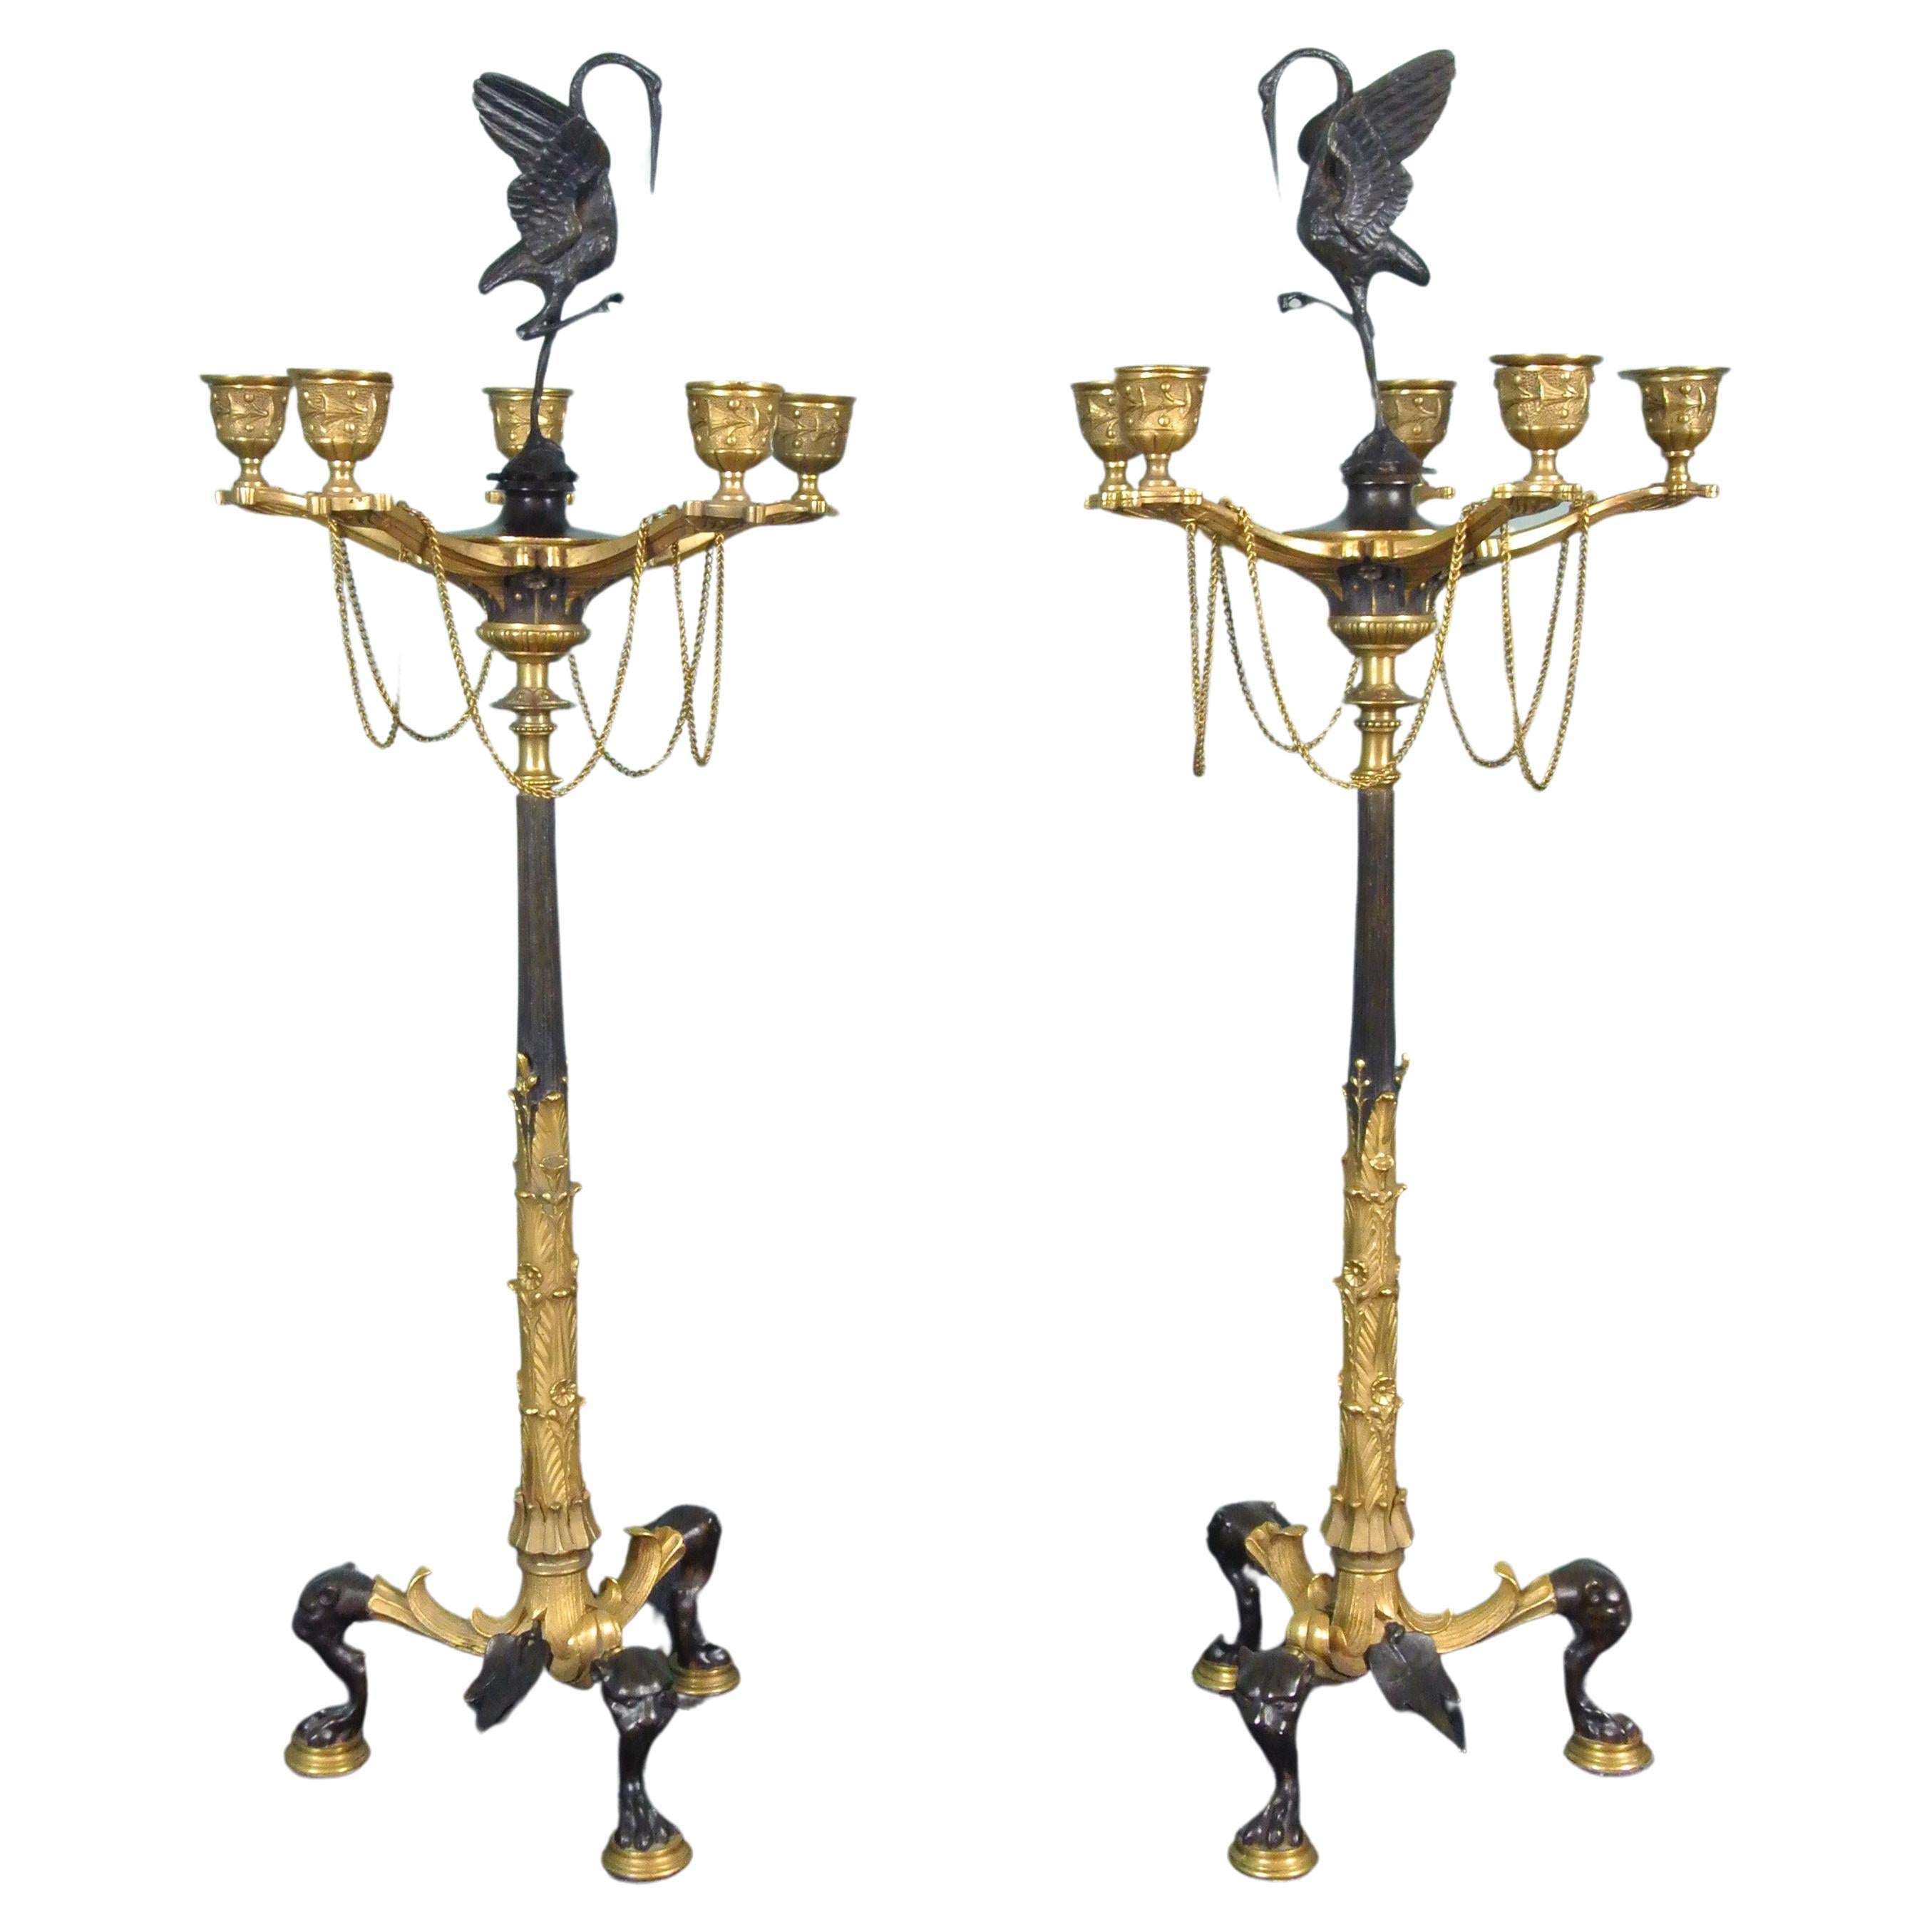 Exemplary Pair Barbedienne Bronze and Ormolu Candelabra c. 1880 For Sale